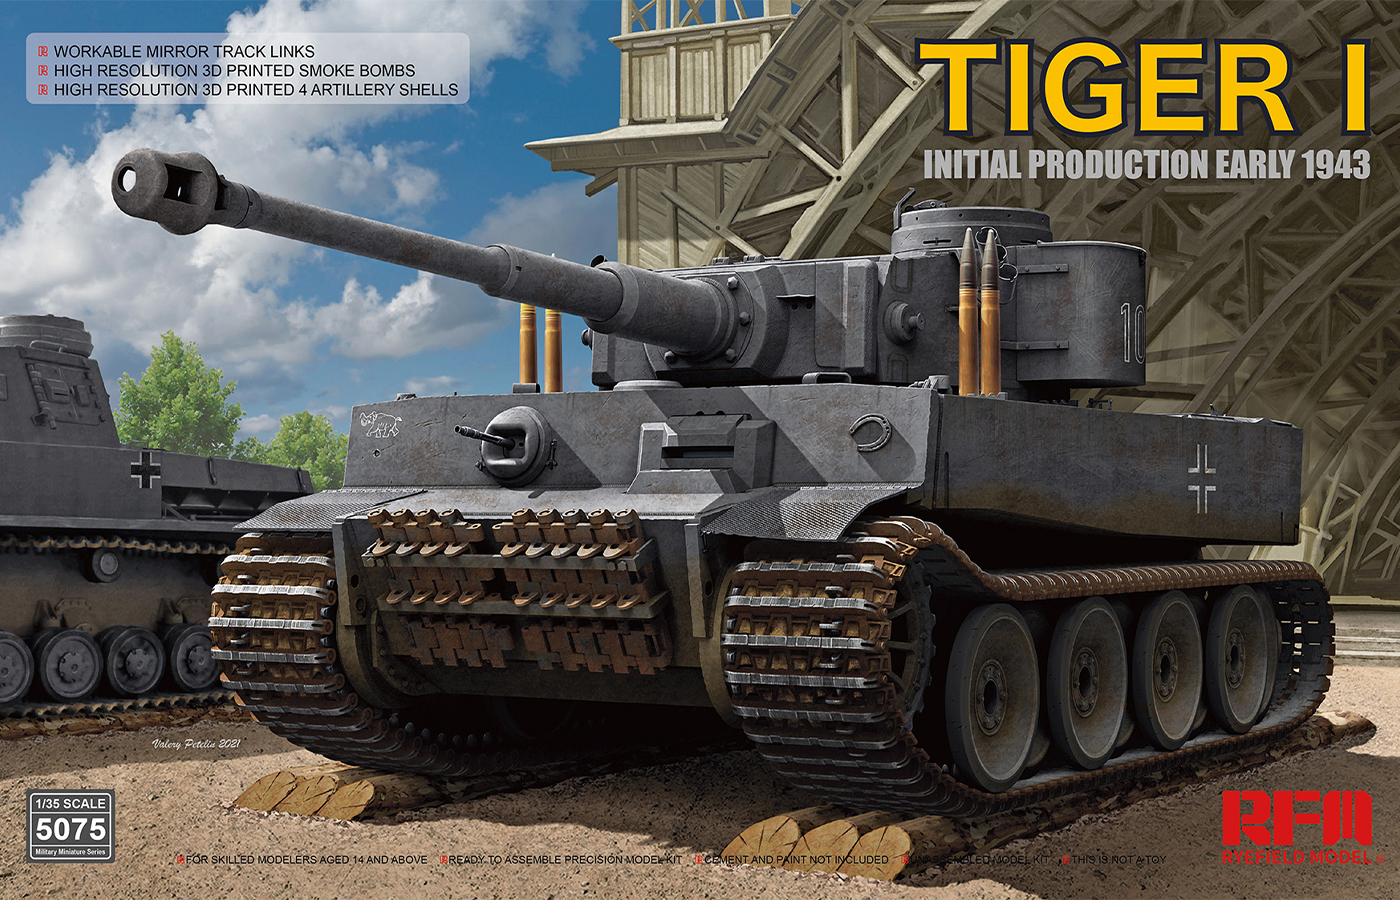 RM-5075 TIGER 1 INITIAL PRODUCTION EARLY 1943